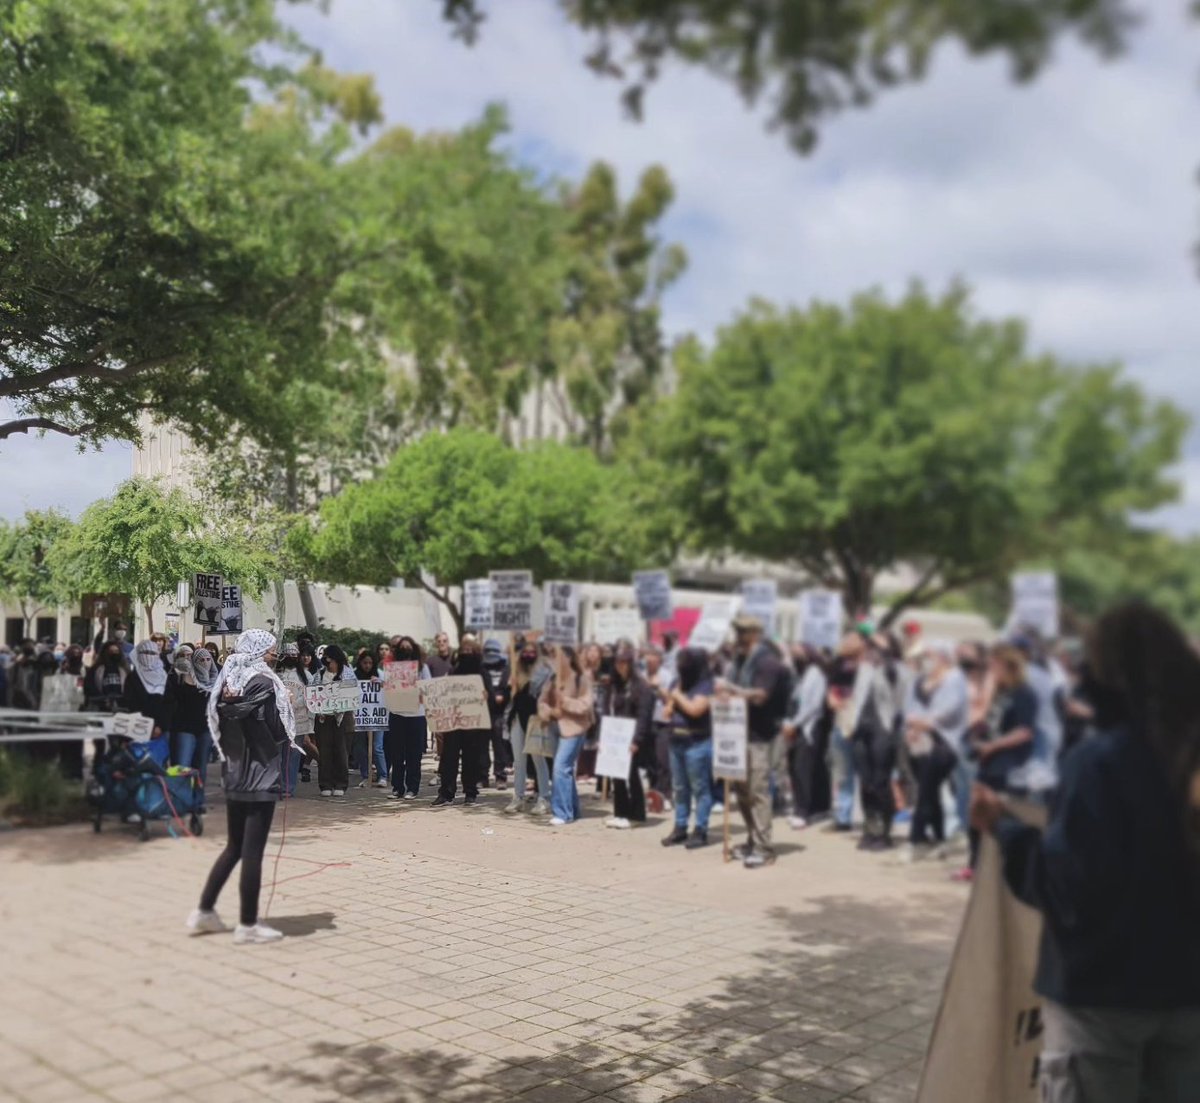 'We demand that UCI divest from Israel's genocide against Palestine'

Support your students' calls for Palestinian liberation!!
#freepalestine #uci #solidarity